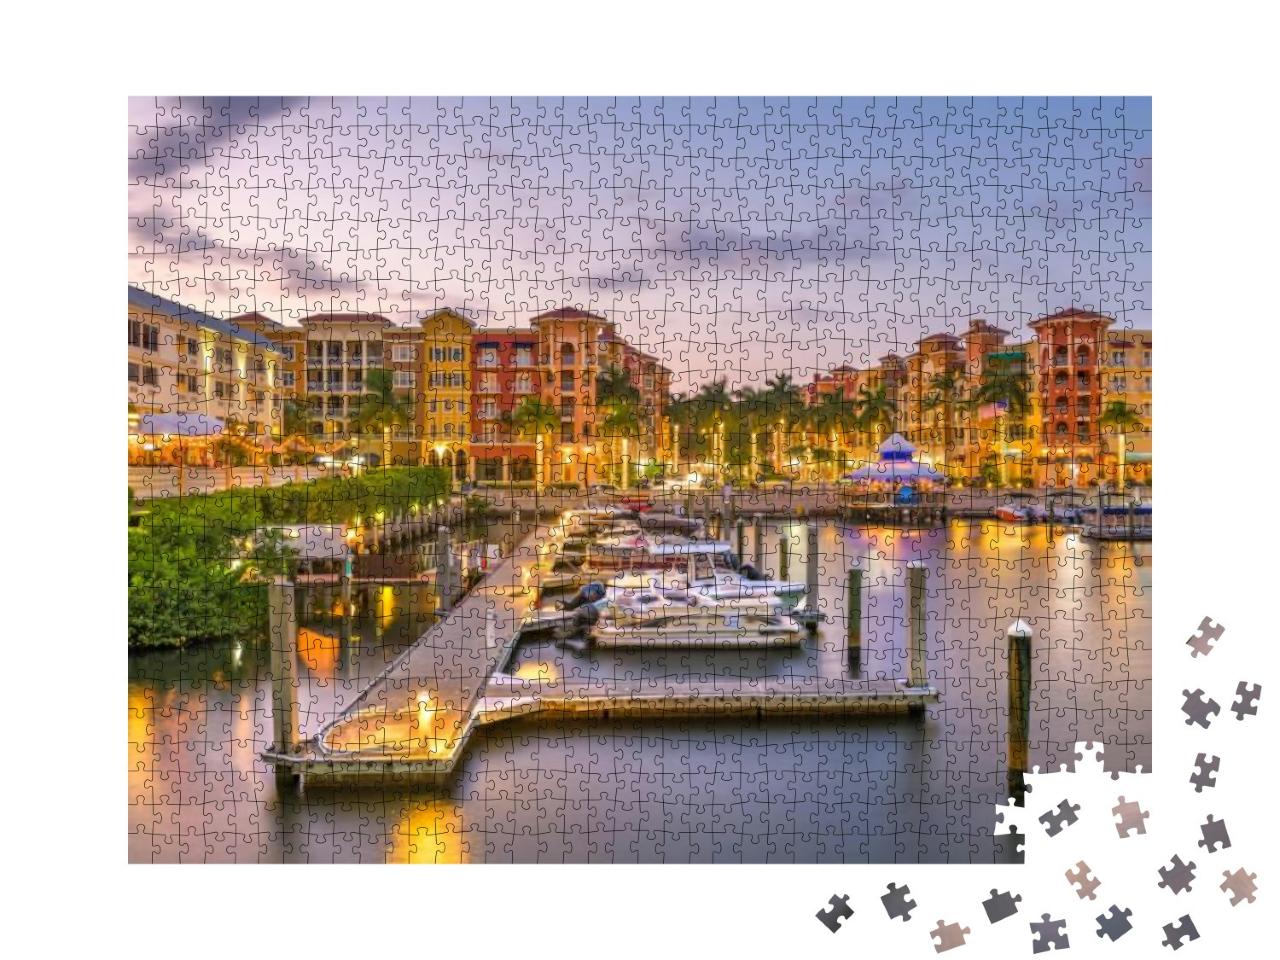 Naples, Florida, USA Town Skyline on the Water At Dusk... Jigsaw Puzzle with 1000 pieces